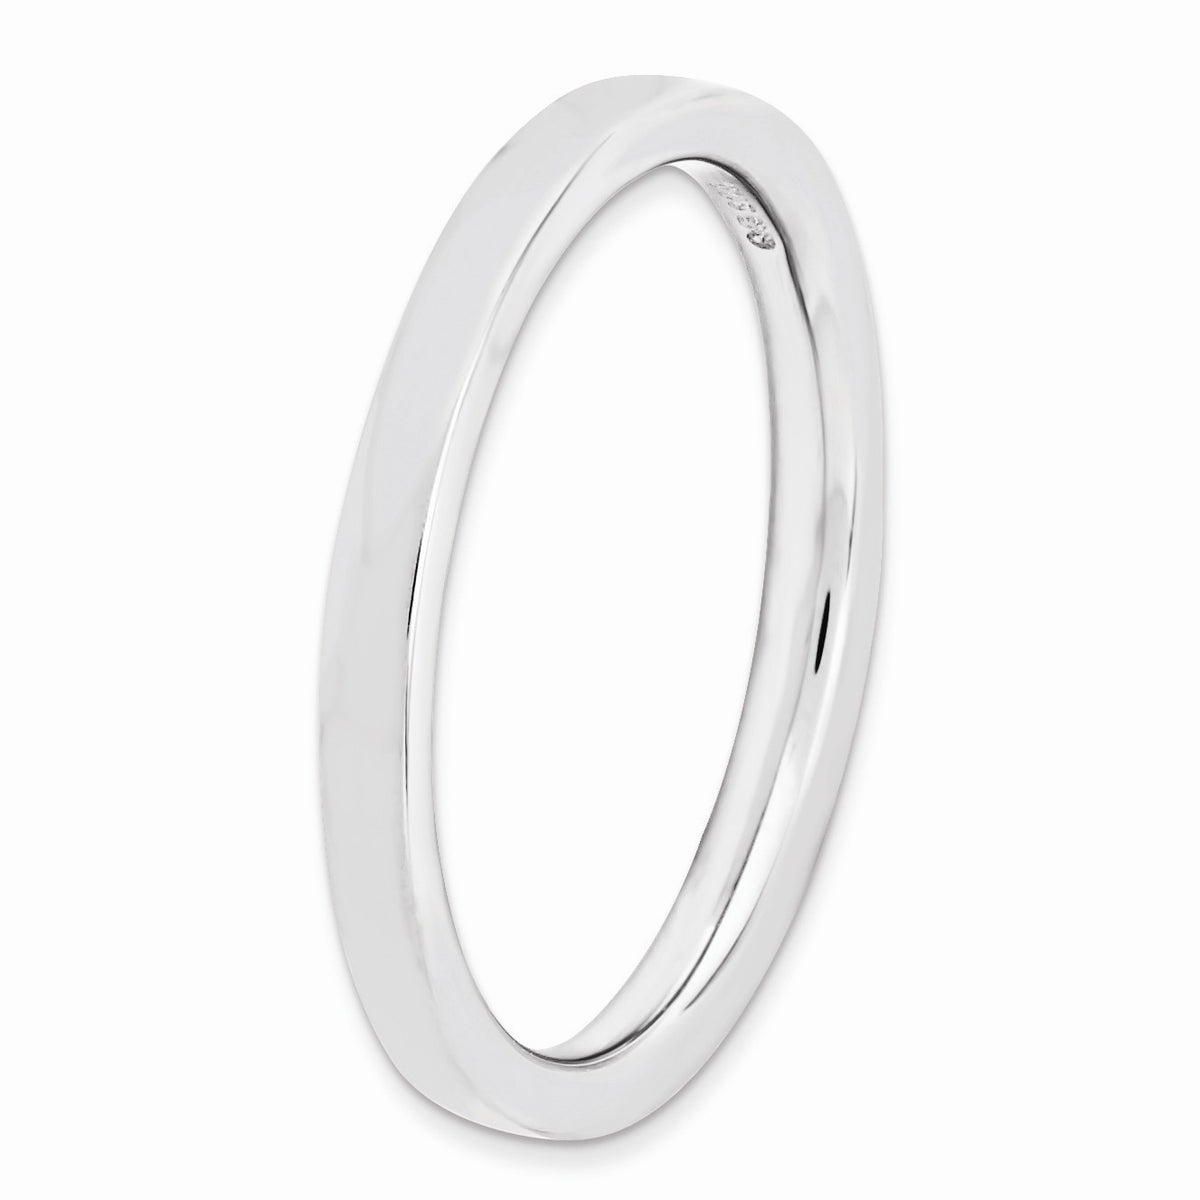 Alternate view of the 2.25mm Stackable Sterling Silver Semi Rounded Band by The Black Bow Jewelry Co.